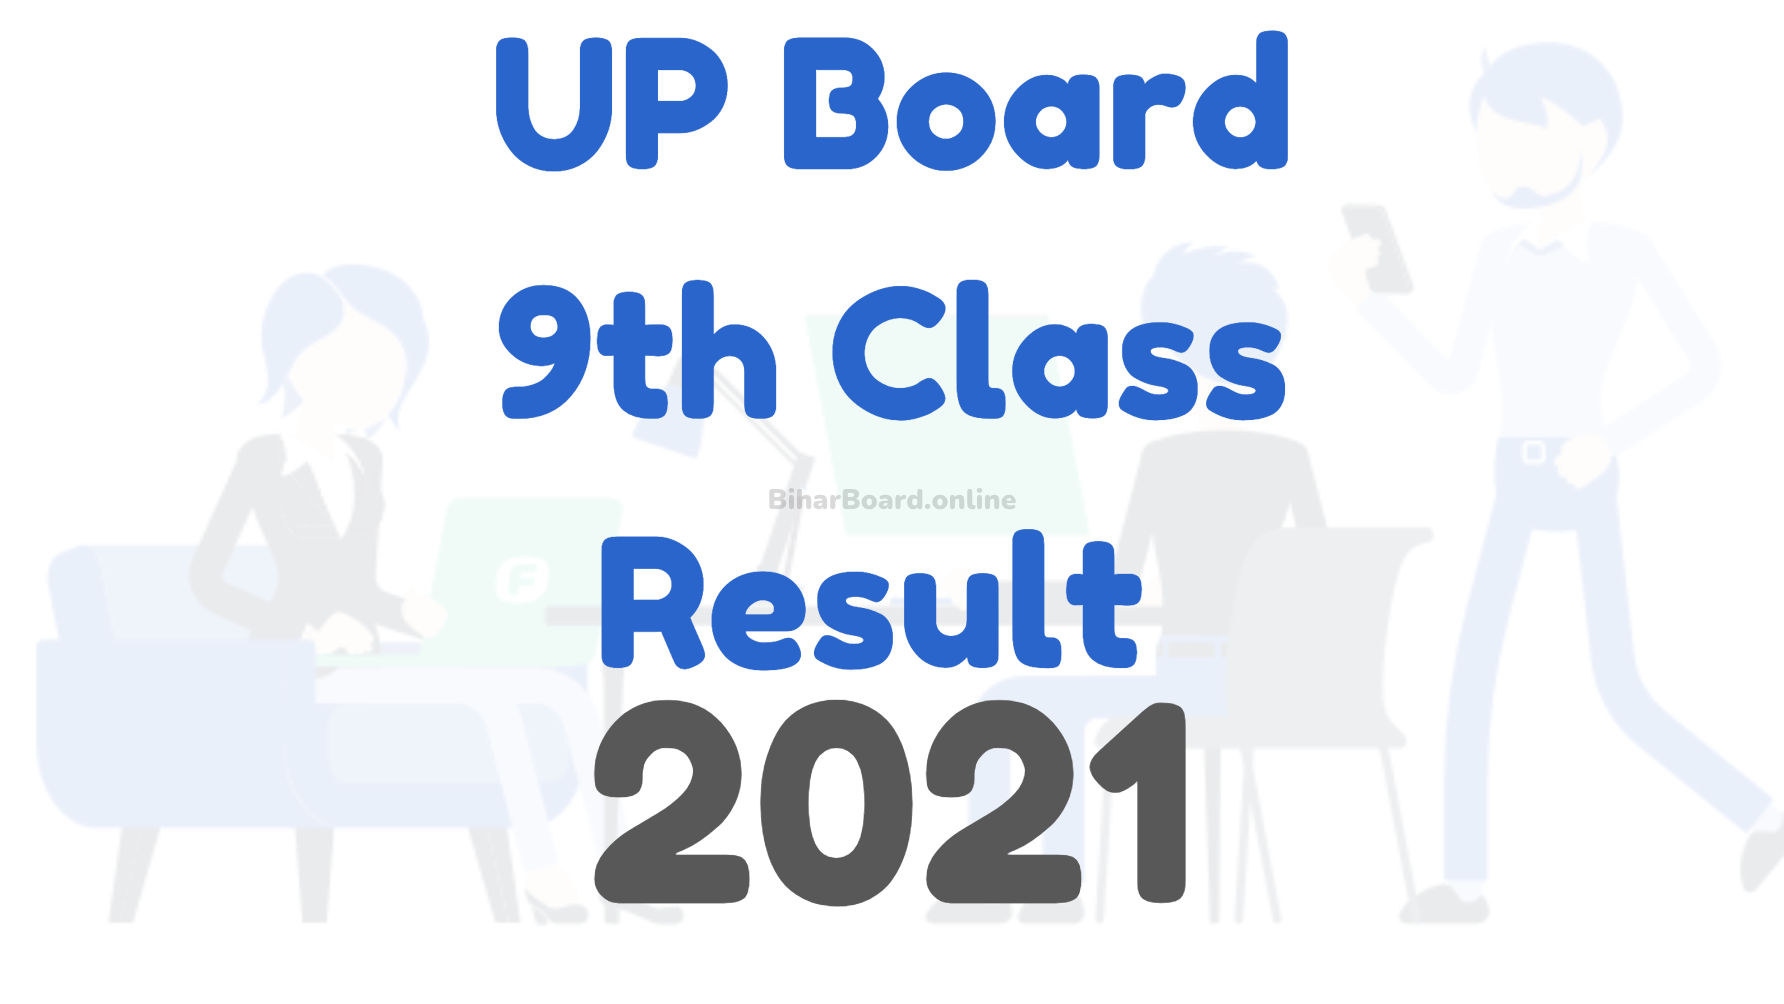 up board 9 class result 2021, up board exam 2021, up board exam result 2021, up board exam result